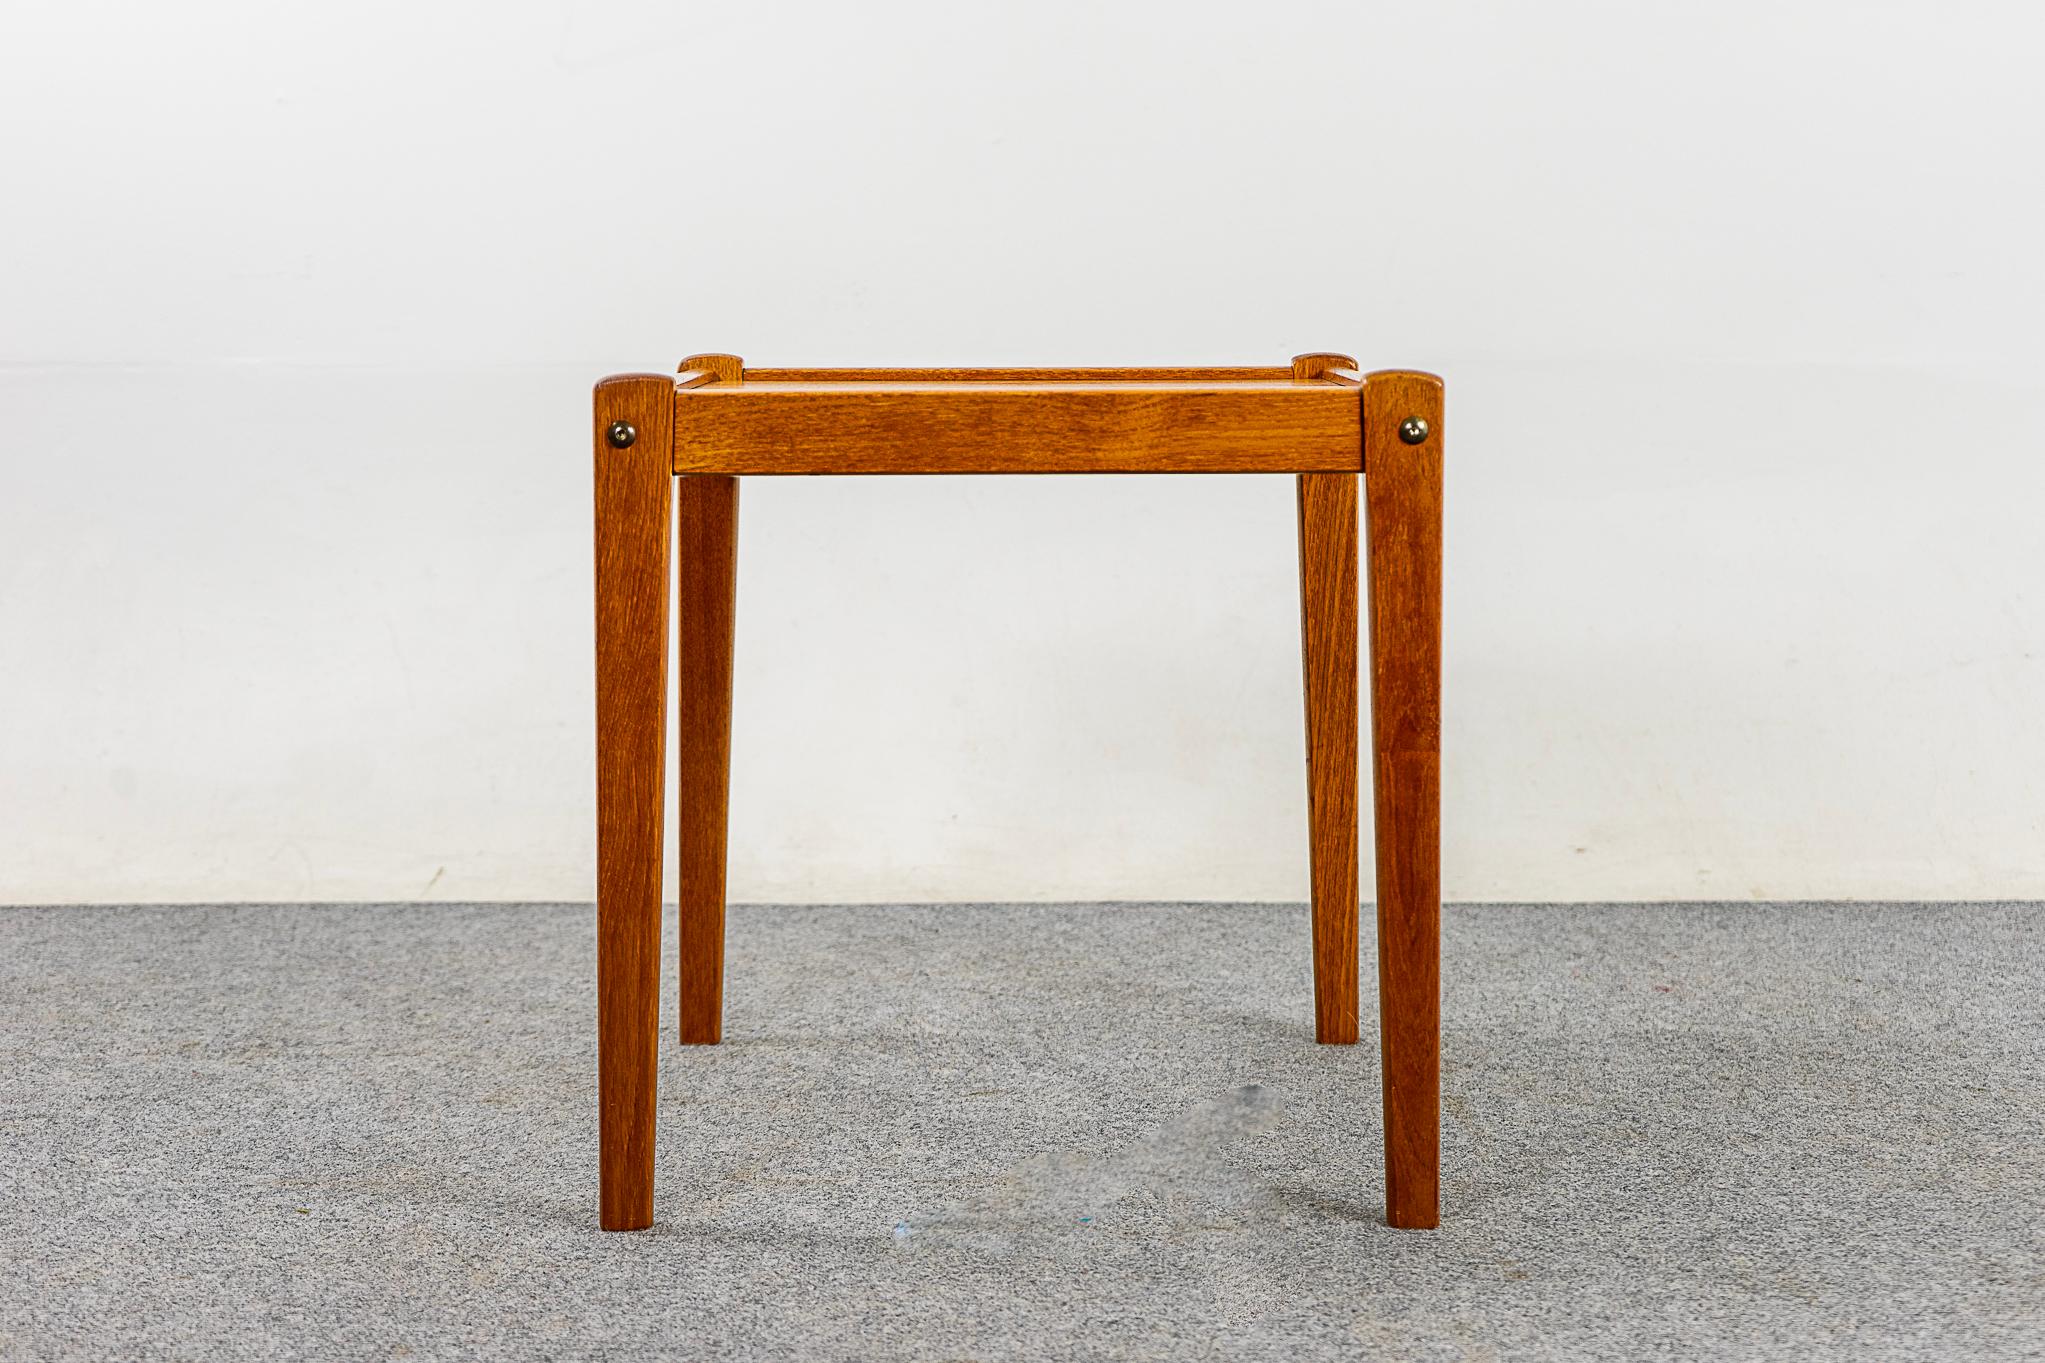 Teak Danish side table by Spottrup, circa 1960's. Solid wood construction on the base and handsome book-matched veneer on the flat surfaces. Compact, highly functional table pairs perfectly with lounge chairs.

Please inquire for international